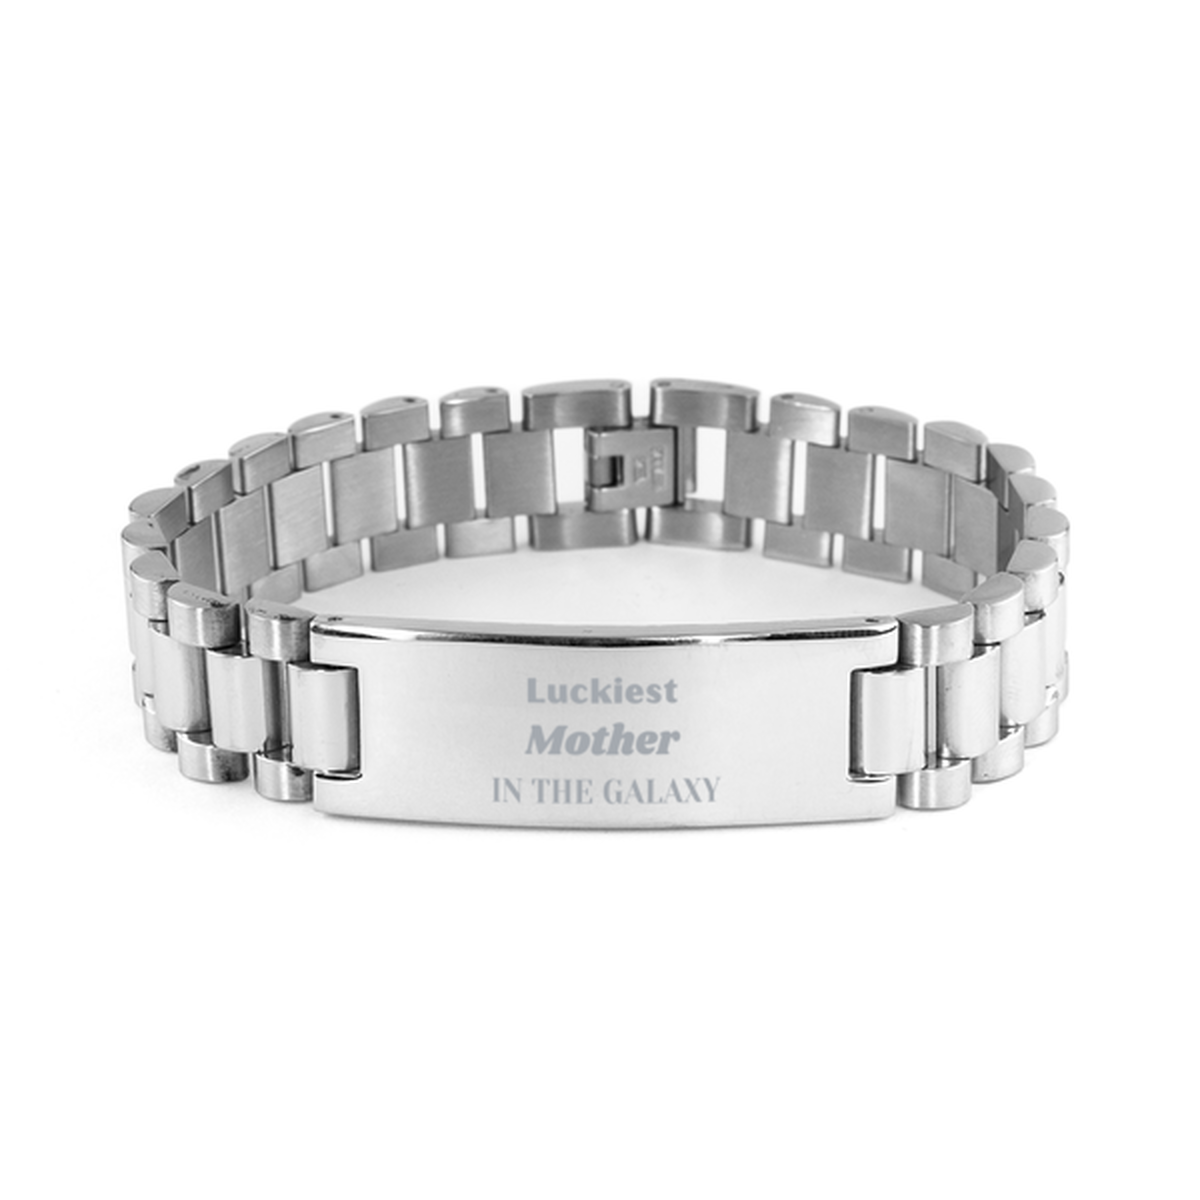 Luckiest Mother in the Galaxy, To My Mother Engraved Gifts, Christmas Mother Ladder Stainless Steel Bracelet Gifts, X-mas Birthday Unique Gifts For Mother Men Women